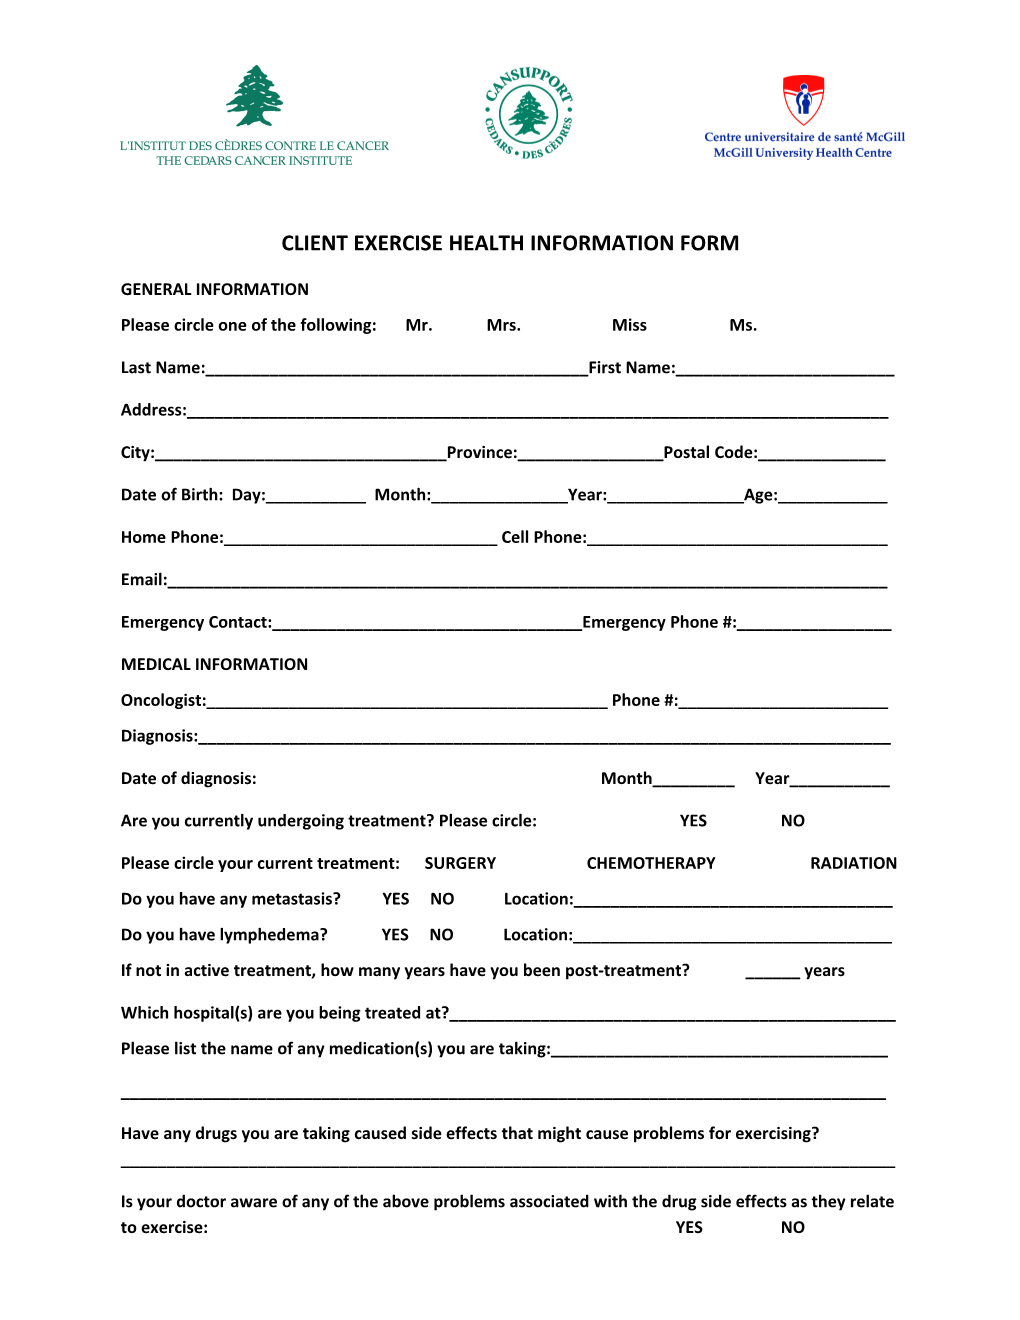 Client Exercise Health Information Form